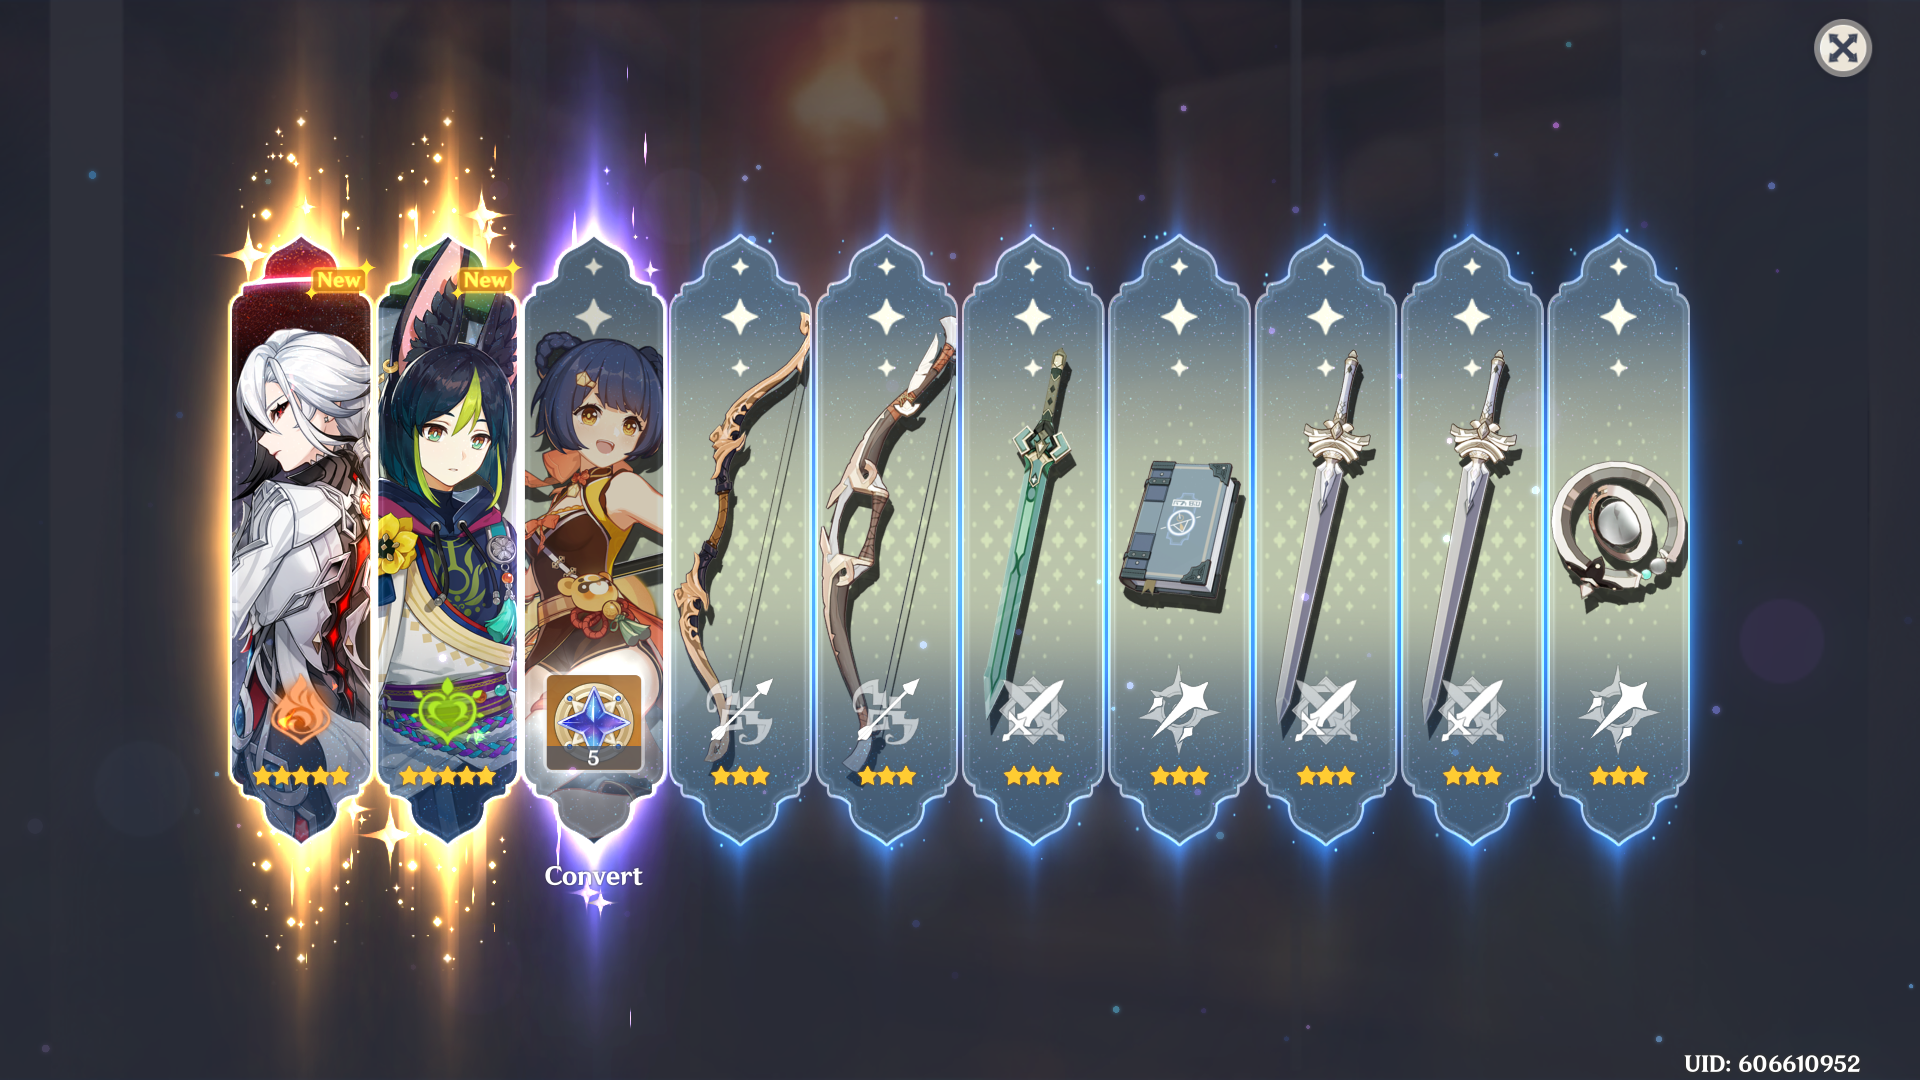 10 pull results in genshin with Arlecchino, Tighnari, and Xianling